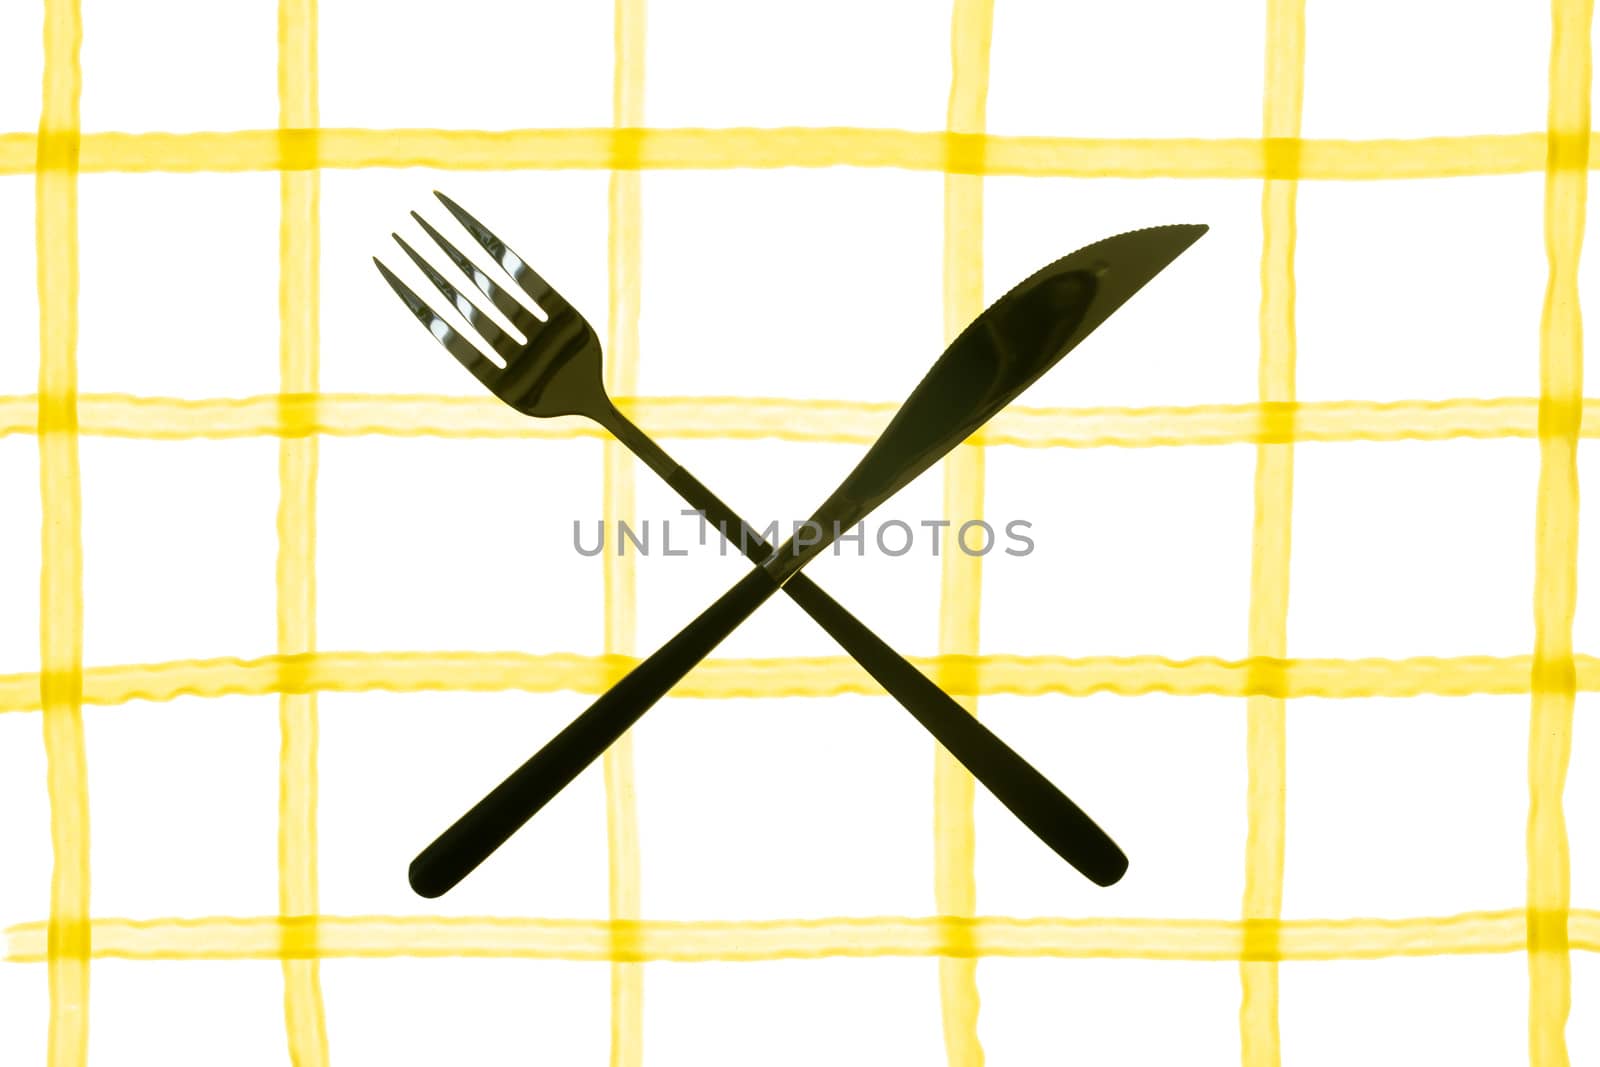 spaghetti pasta laid out in the form of a cell with fork and knife by sashokddt